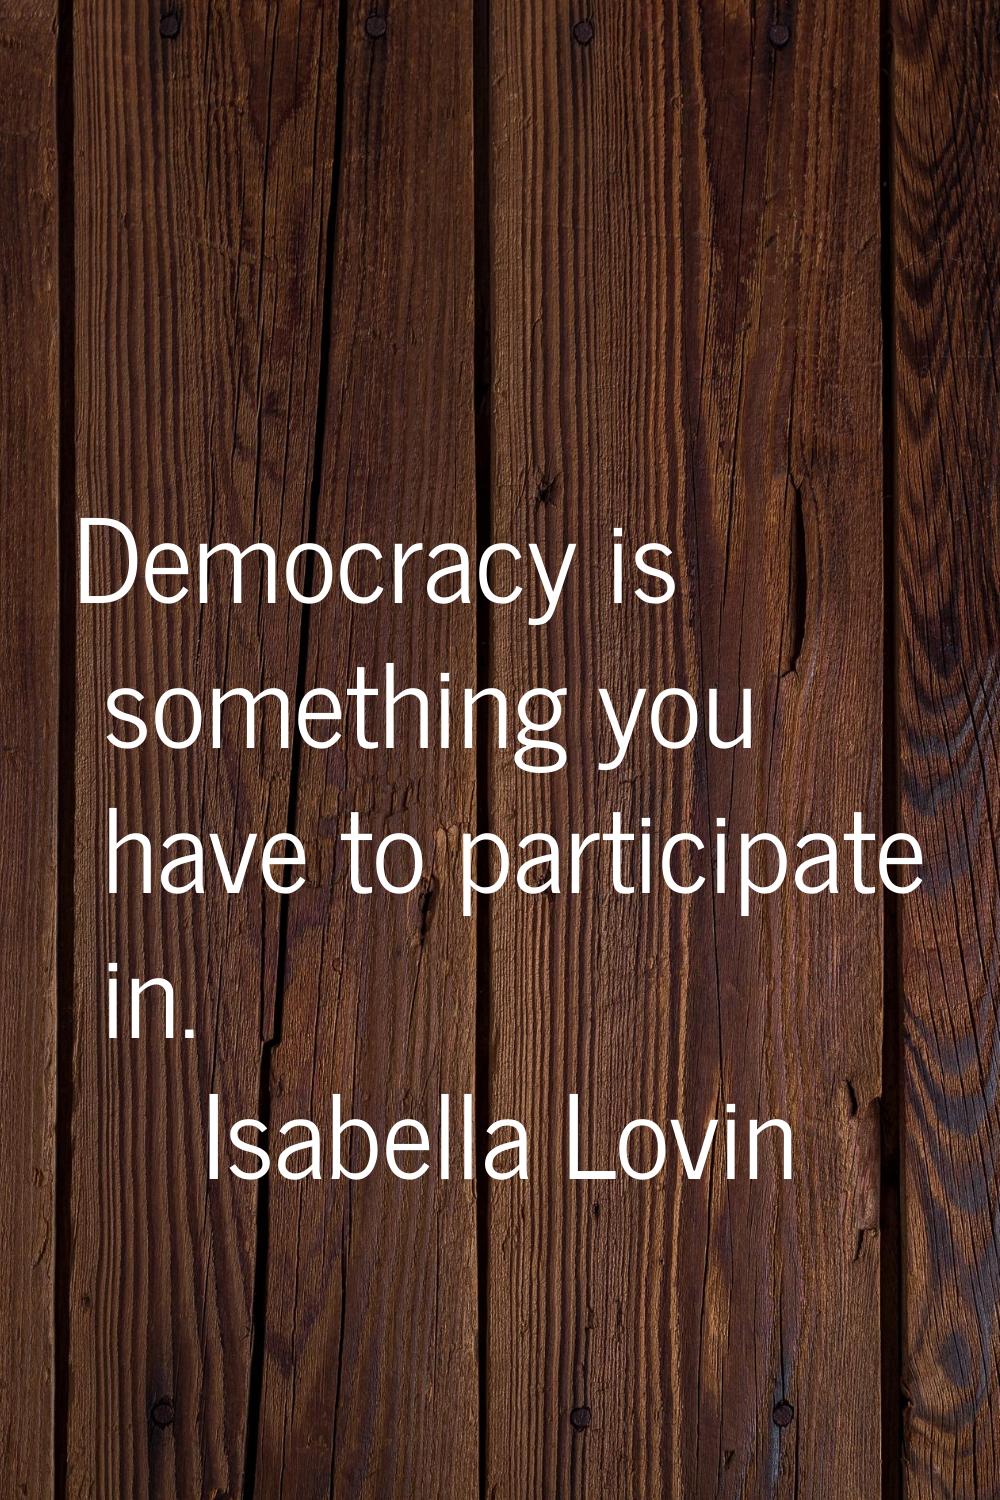 Democracy is something you have to participate in.